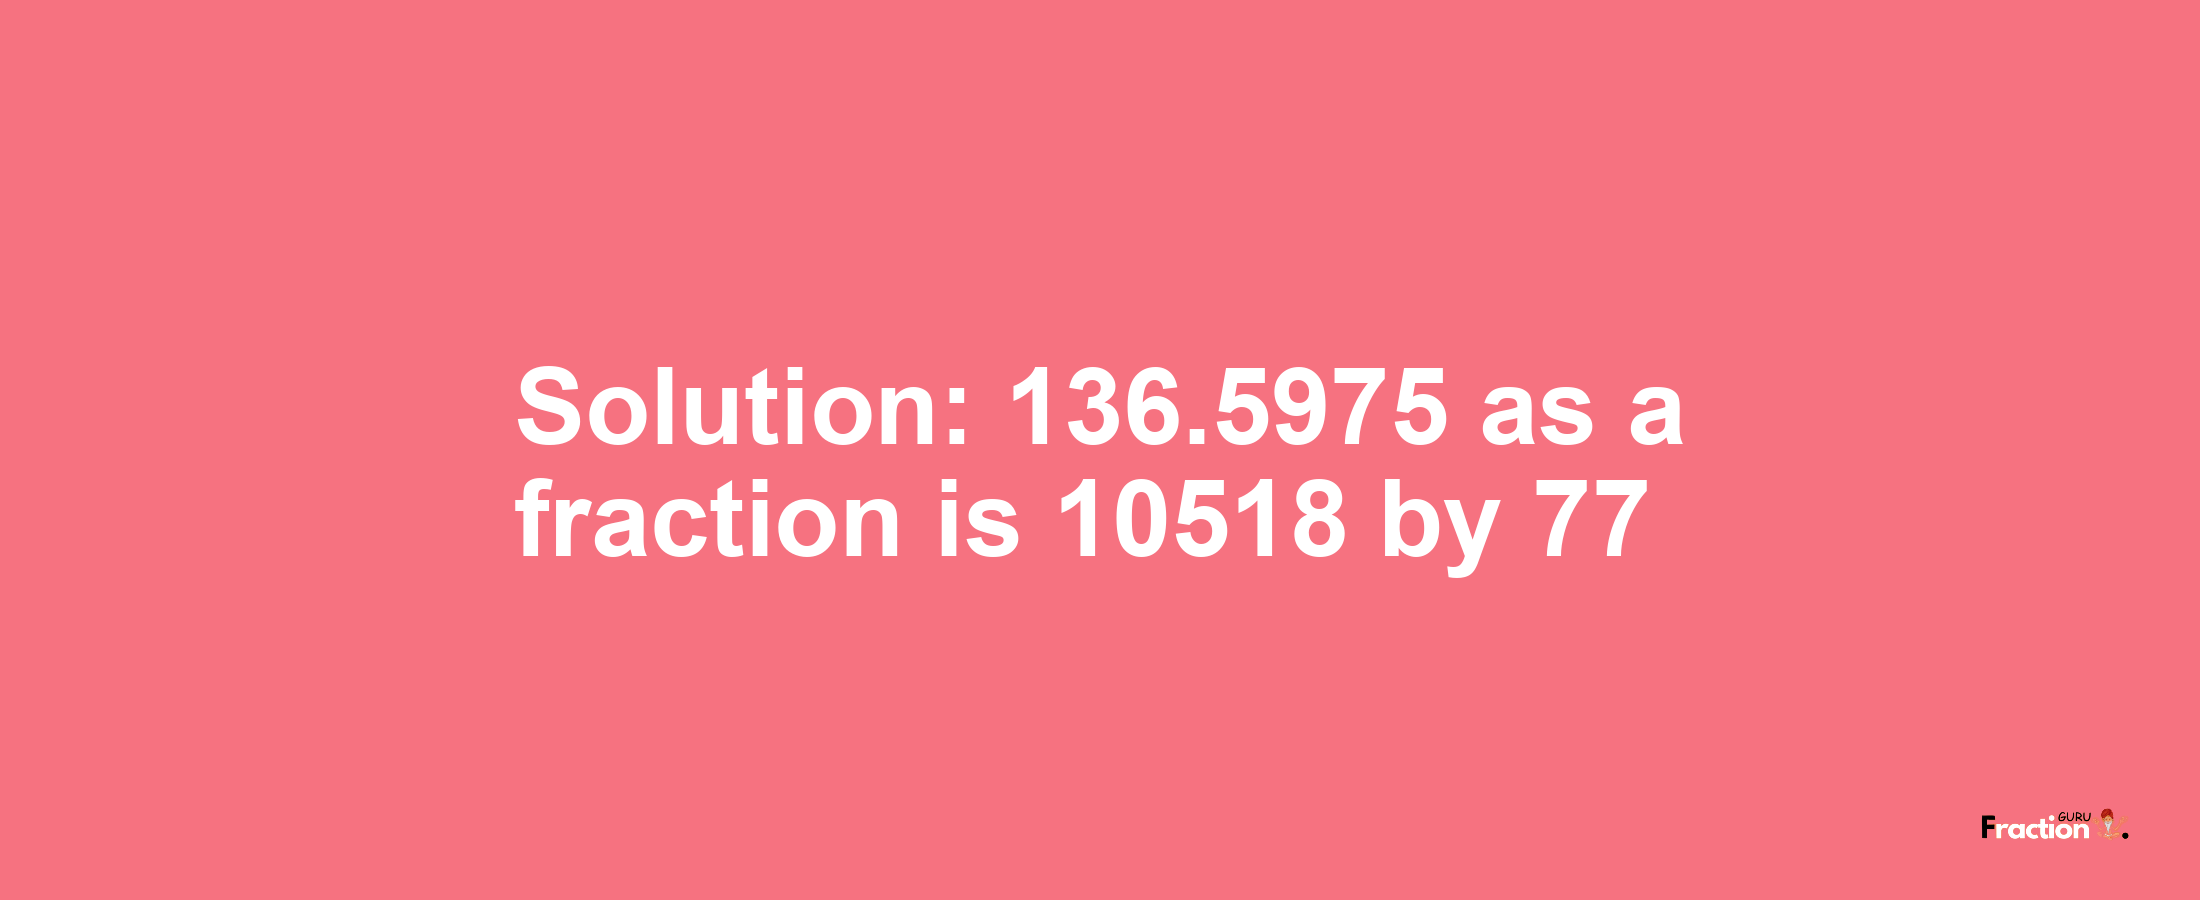 Solution:136.5975 as a fraction is 10518/77